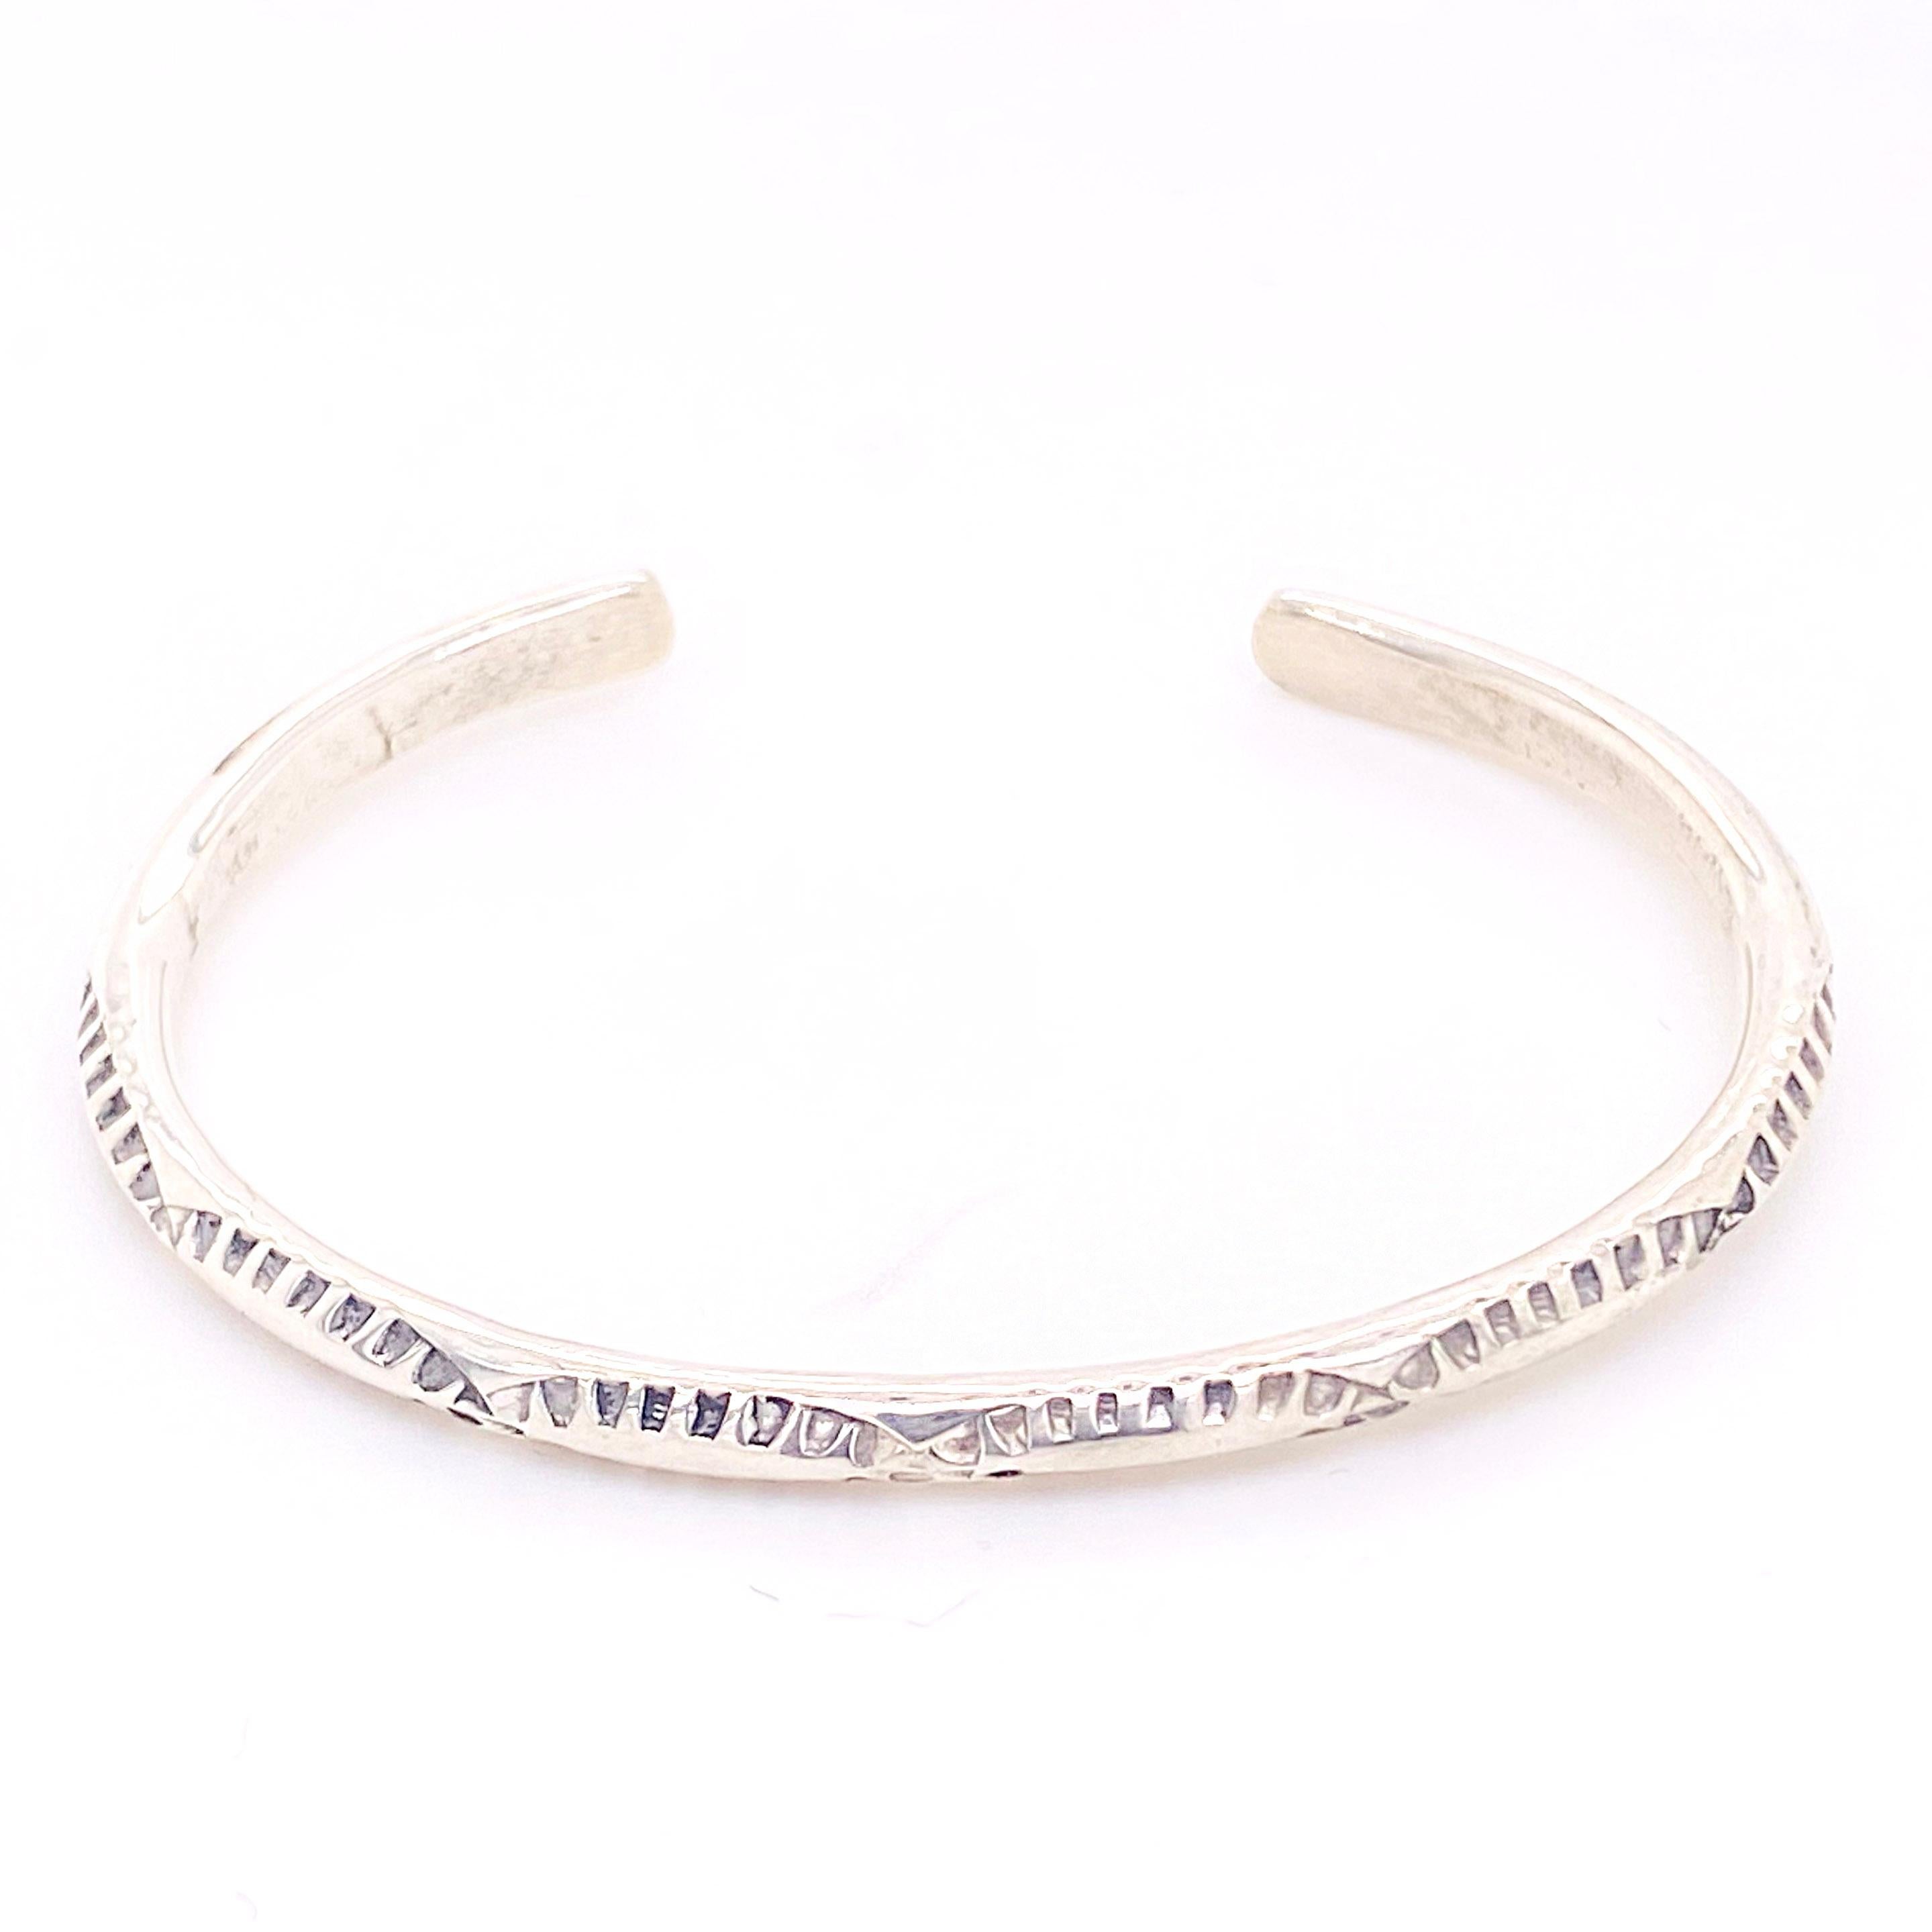 Adorn your baby with this precious Indian cuff bracelet. It was designed and handmade from pure sterling silver silver of .925. This is a great jewelry gift for a baby as it will stay in place and you don’t need to worry about it coming off or being